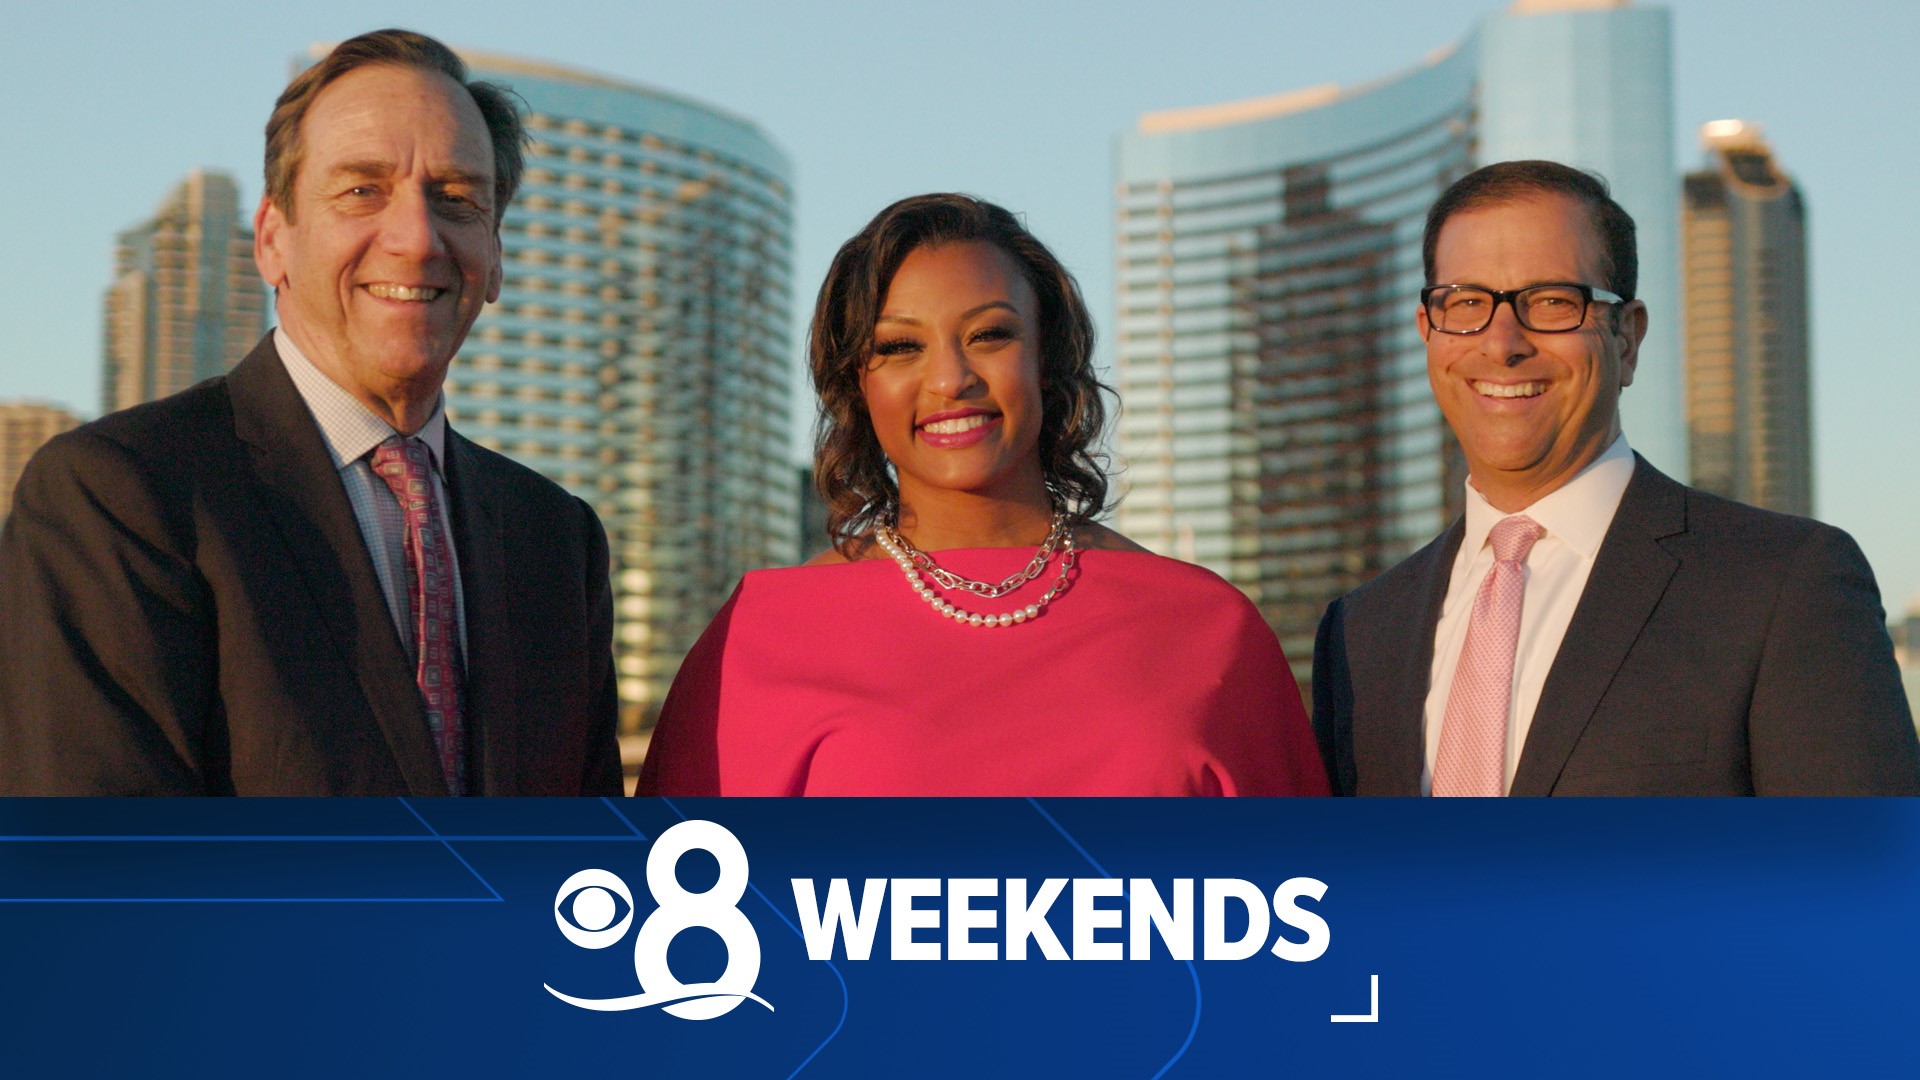 Watch the day's recap of local news, weather, and sports with San Diego's most trusted news team.
